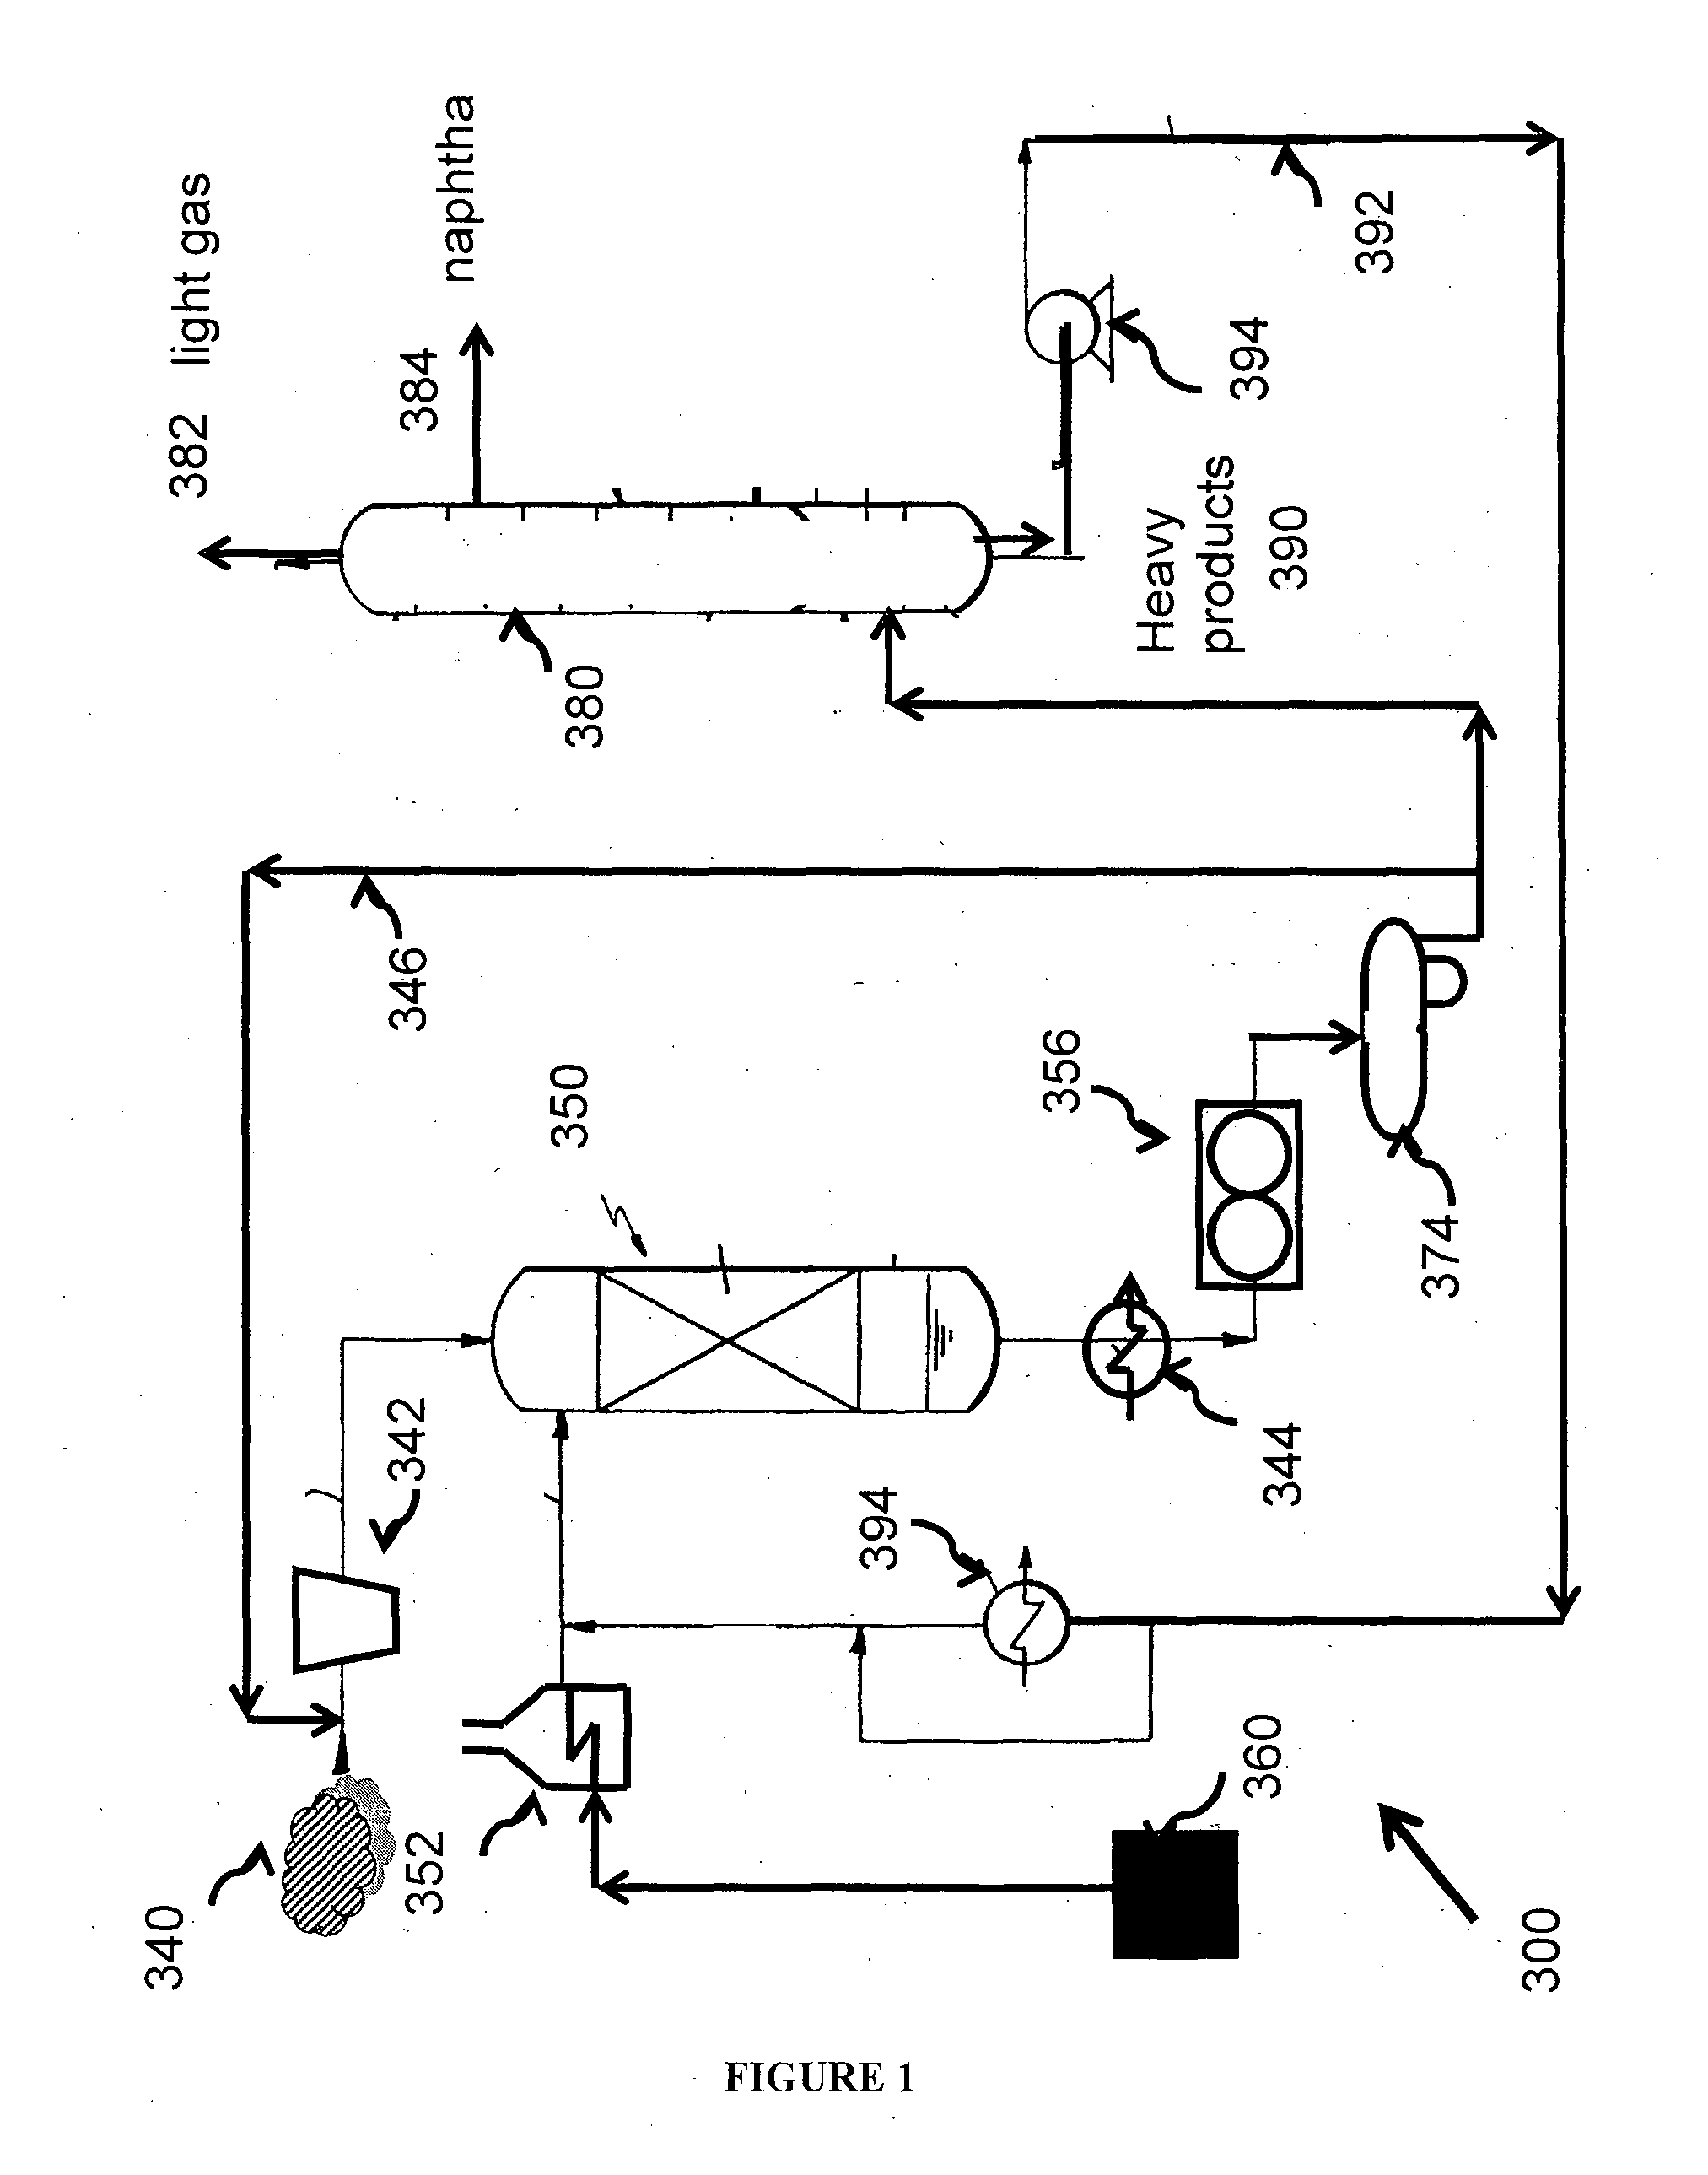 Methods for Producing Hydrocarbon Products from Bio-Oils and/or Coal-Oils